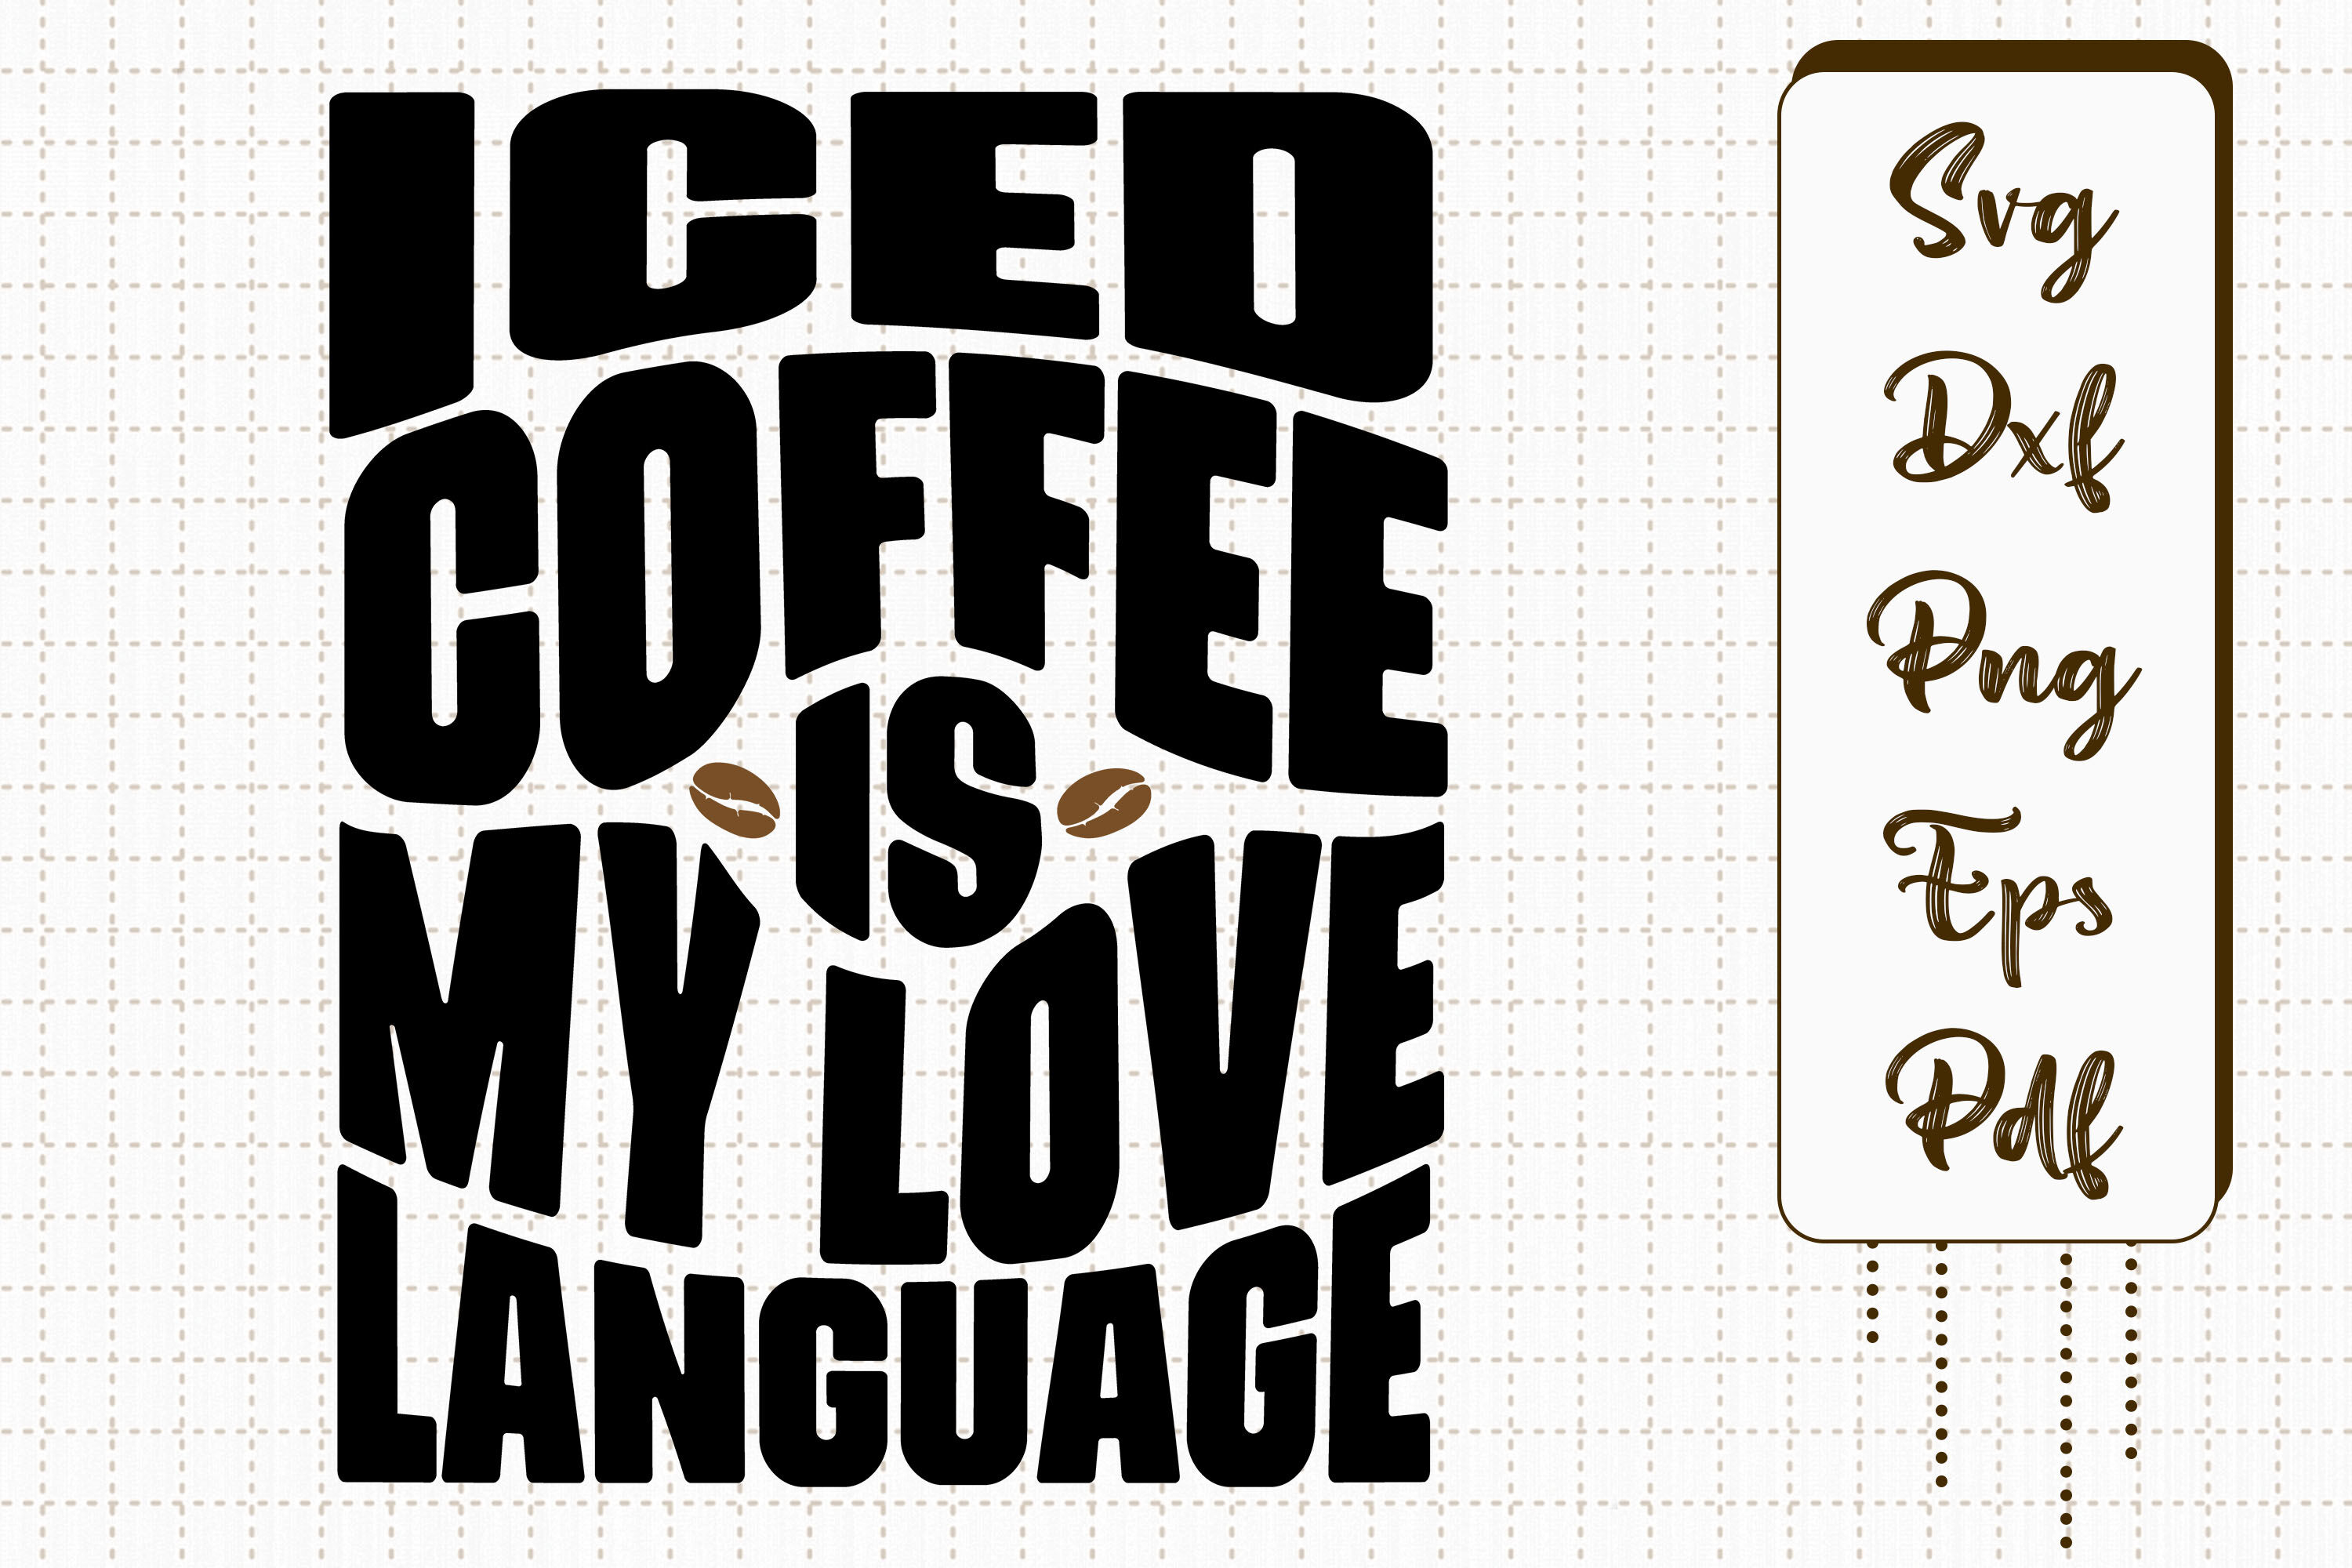 Iced Coffee Appreciation Society SVG PNG Graphic by